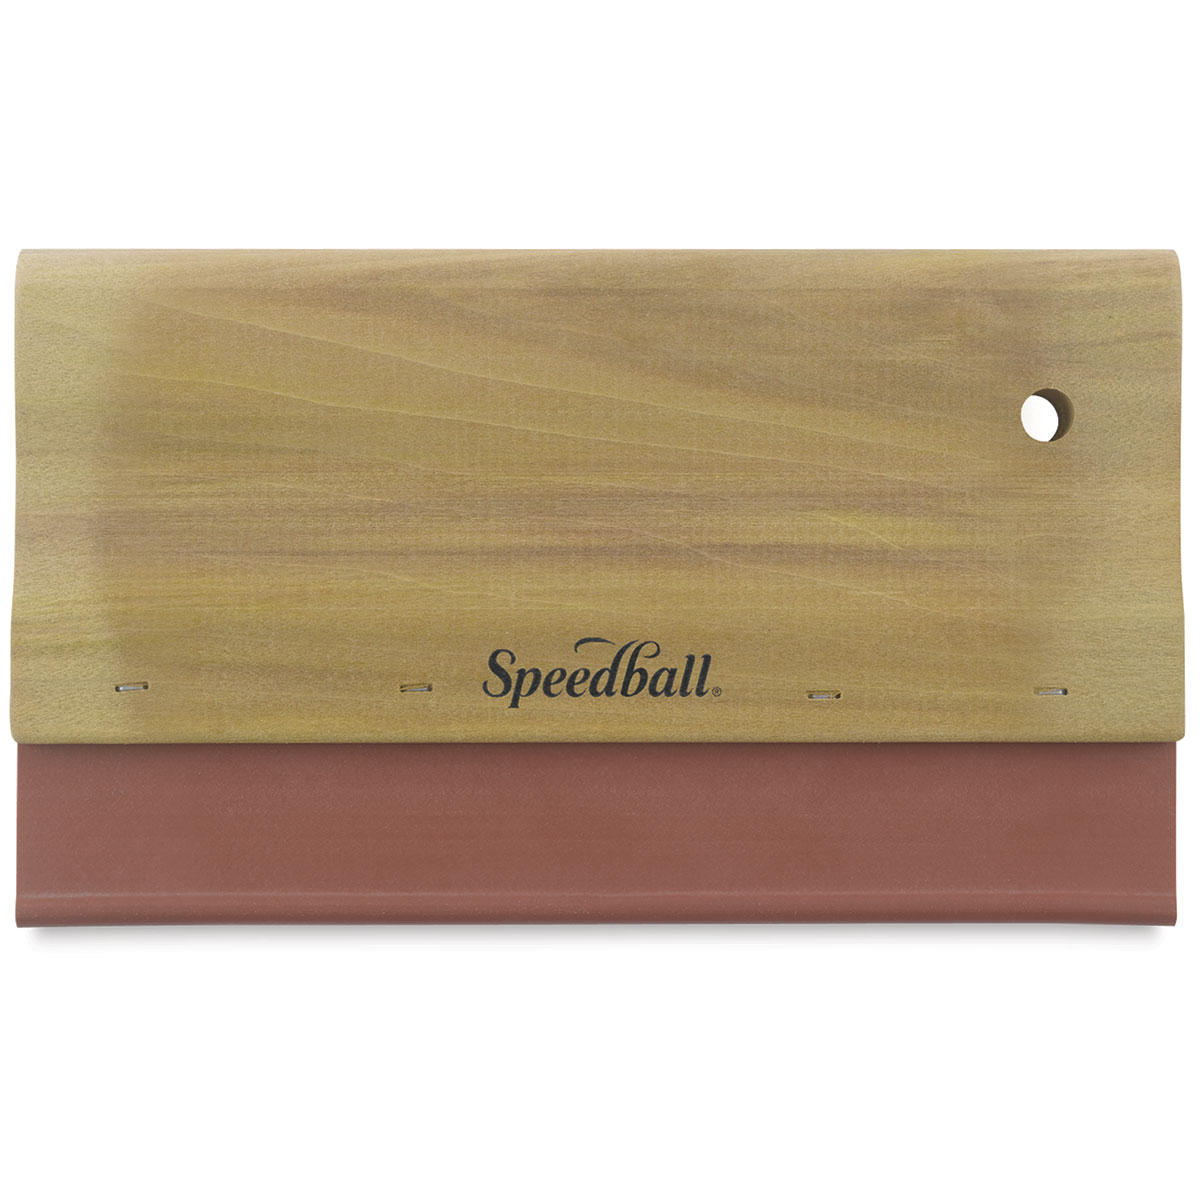 Speedball 12-Inch Fabric Squeegee for Screen Printing 